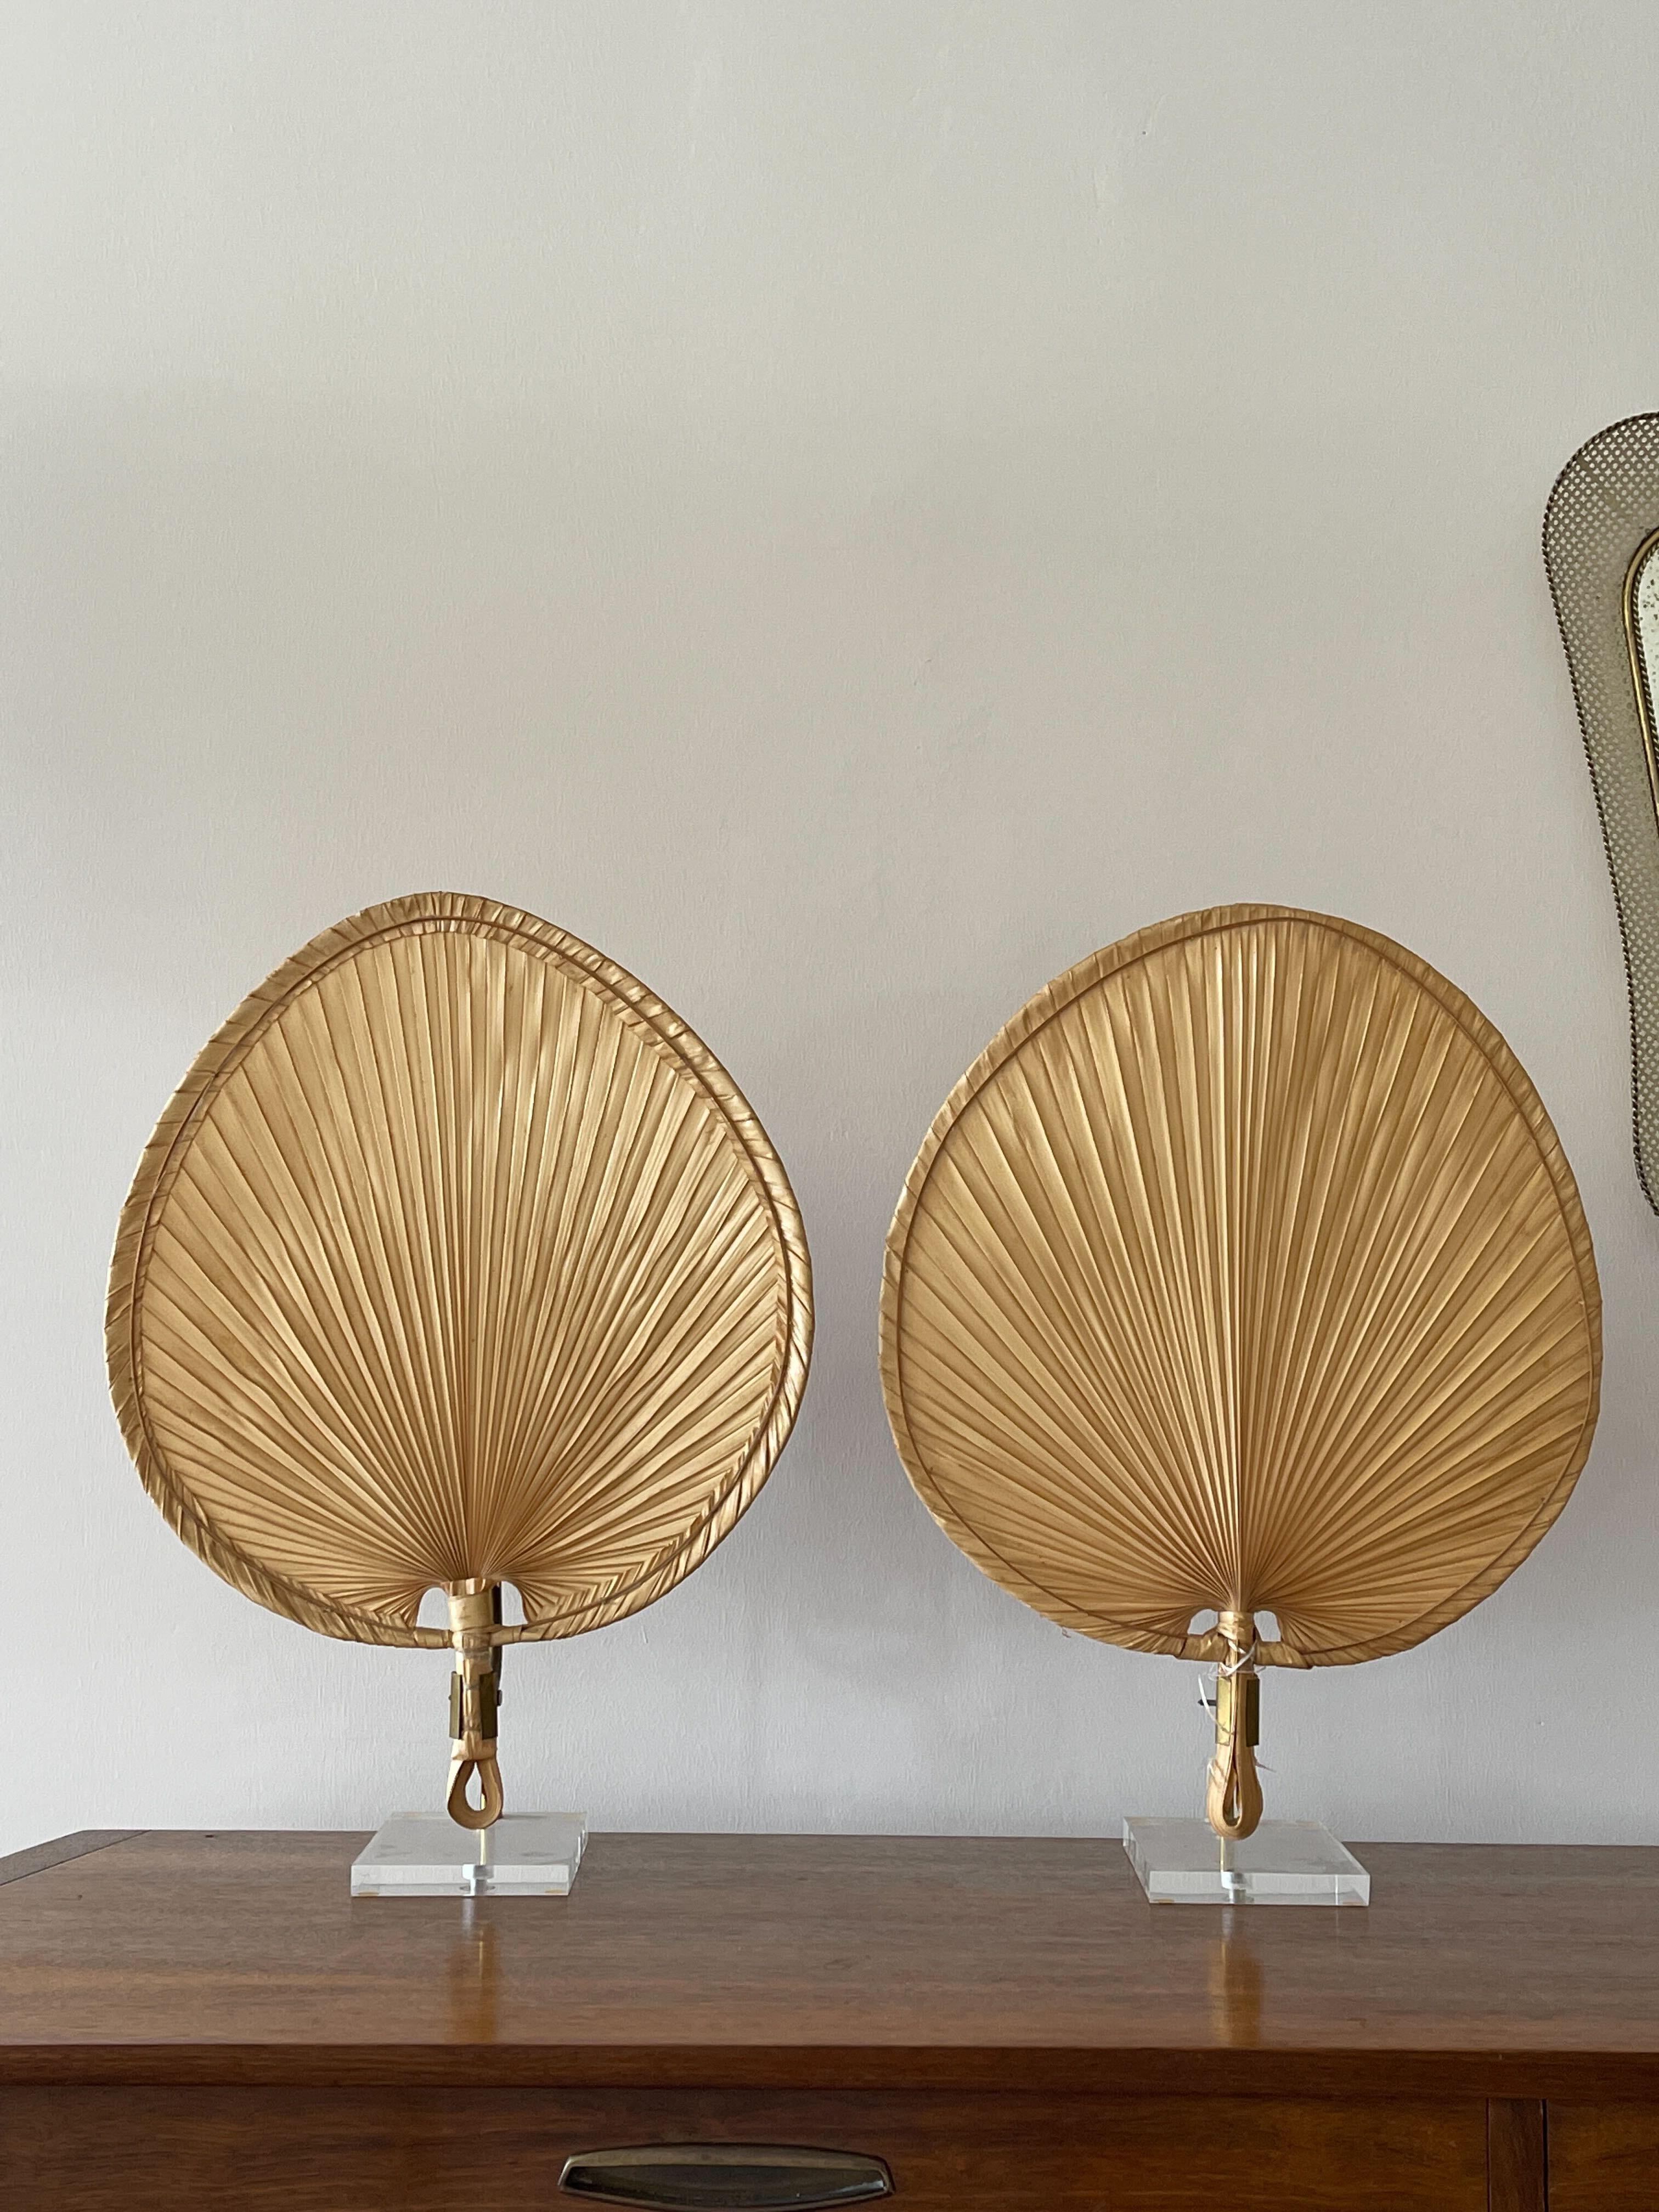 A pair of table lamps in the shape of a Japanese fan, bearing resemblance to Ingo Maurers famous 